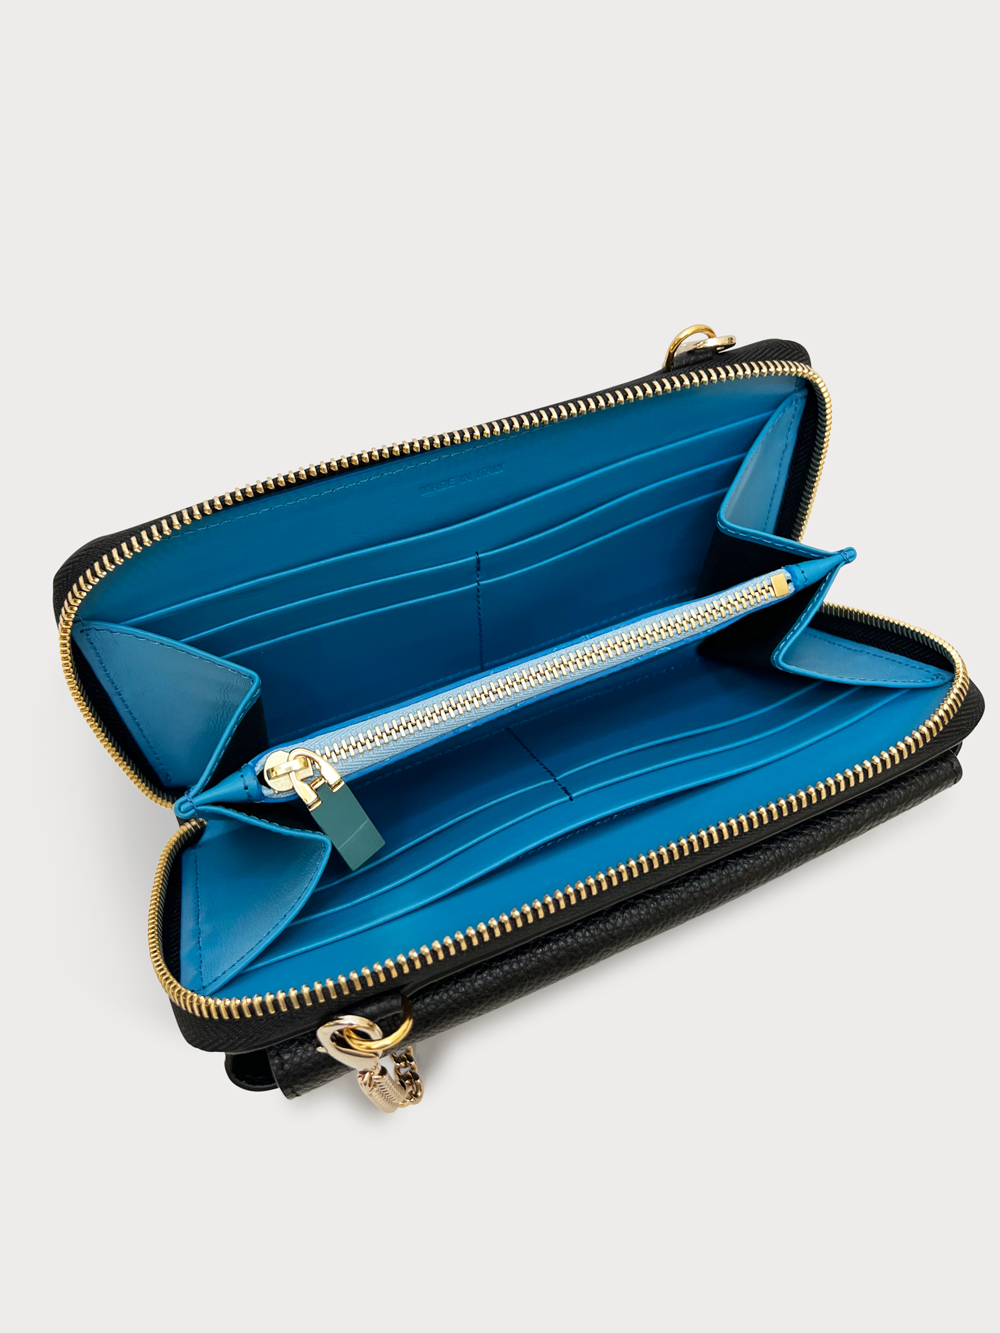 Mel Boteri | 'Himani' Wallet Clutch Bag With Detachable Cross-Body Strap | nero leather | Turquoise Lining